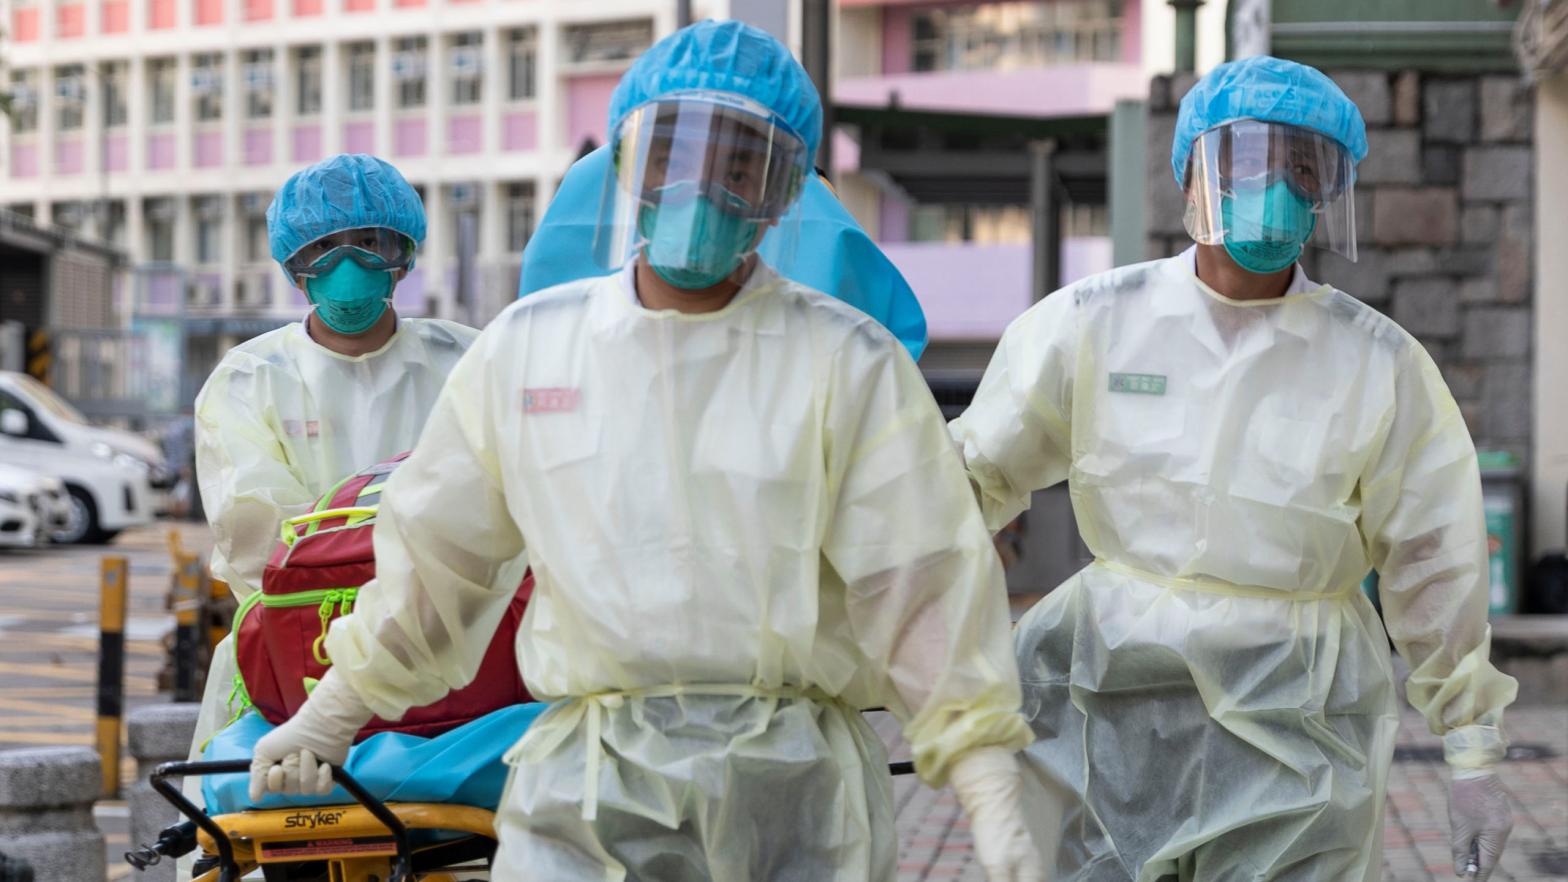 Medical staff wearing personal protective equipment as a precautionary measure against the COVID-19 coronavirus while entering the Lei Muk Shue care home in Hong Kong on August 23, 2020.  (Image: May James, Getty Images)